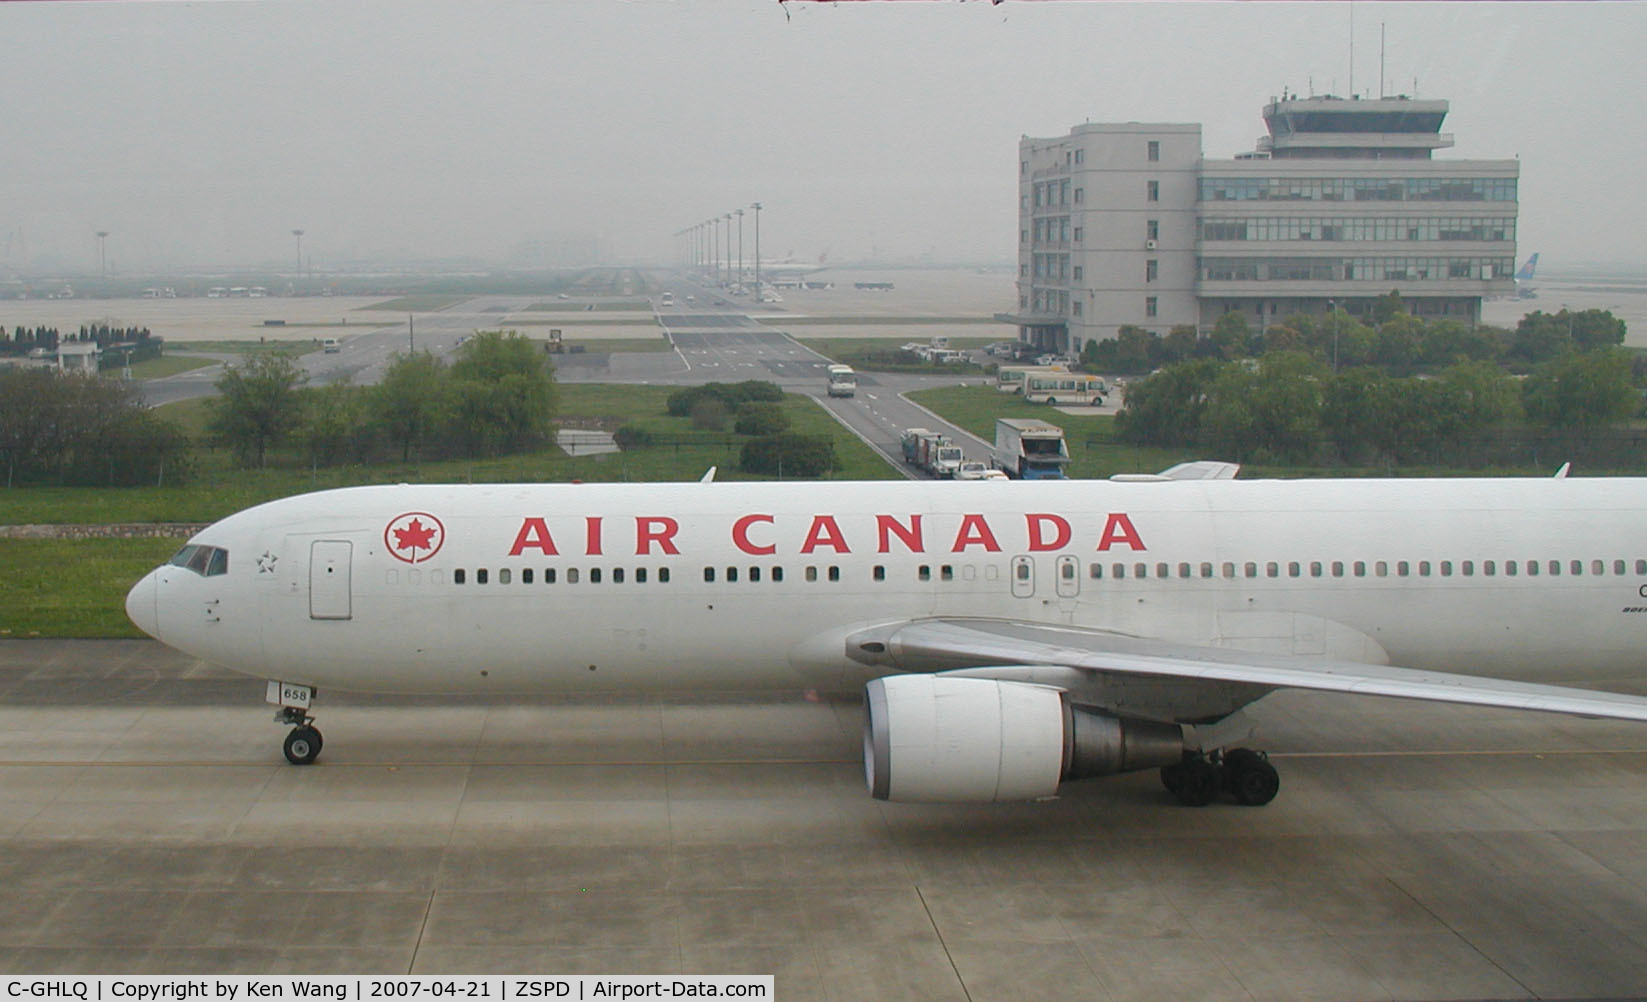 C-GHLQ, 2001 Boeing 767-333/ER C/N 30846, Air Canada Boeing 767 taxiing to gate